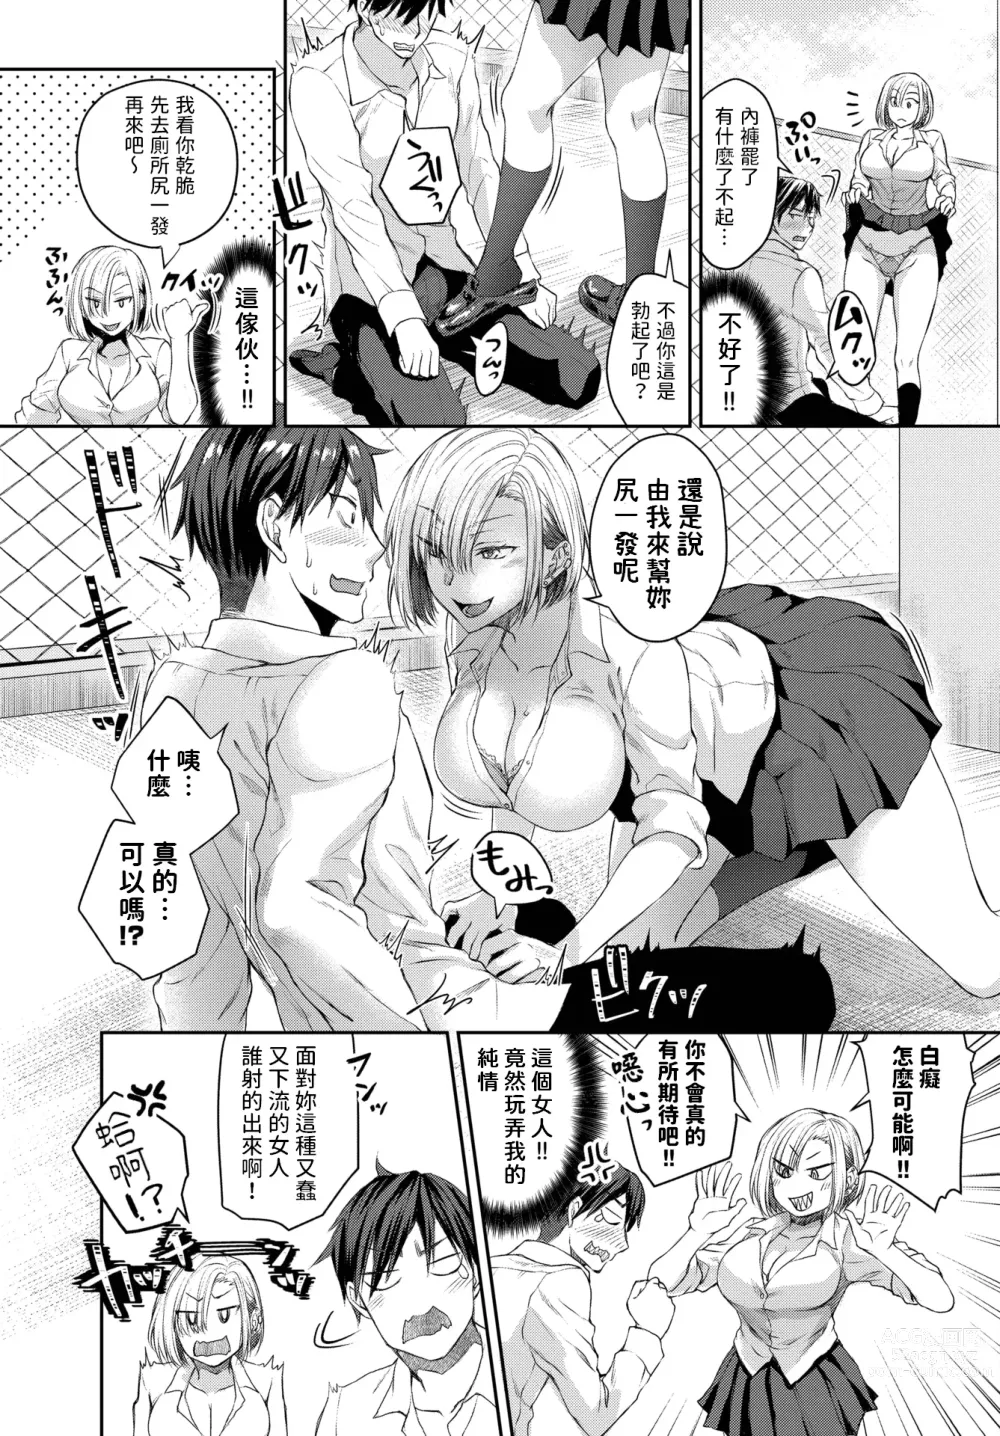 Page 5 of doujinshi 屋上ランデブー